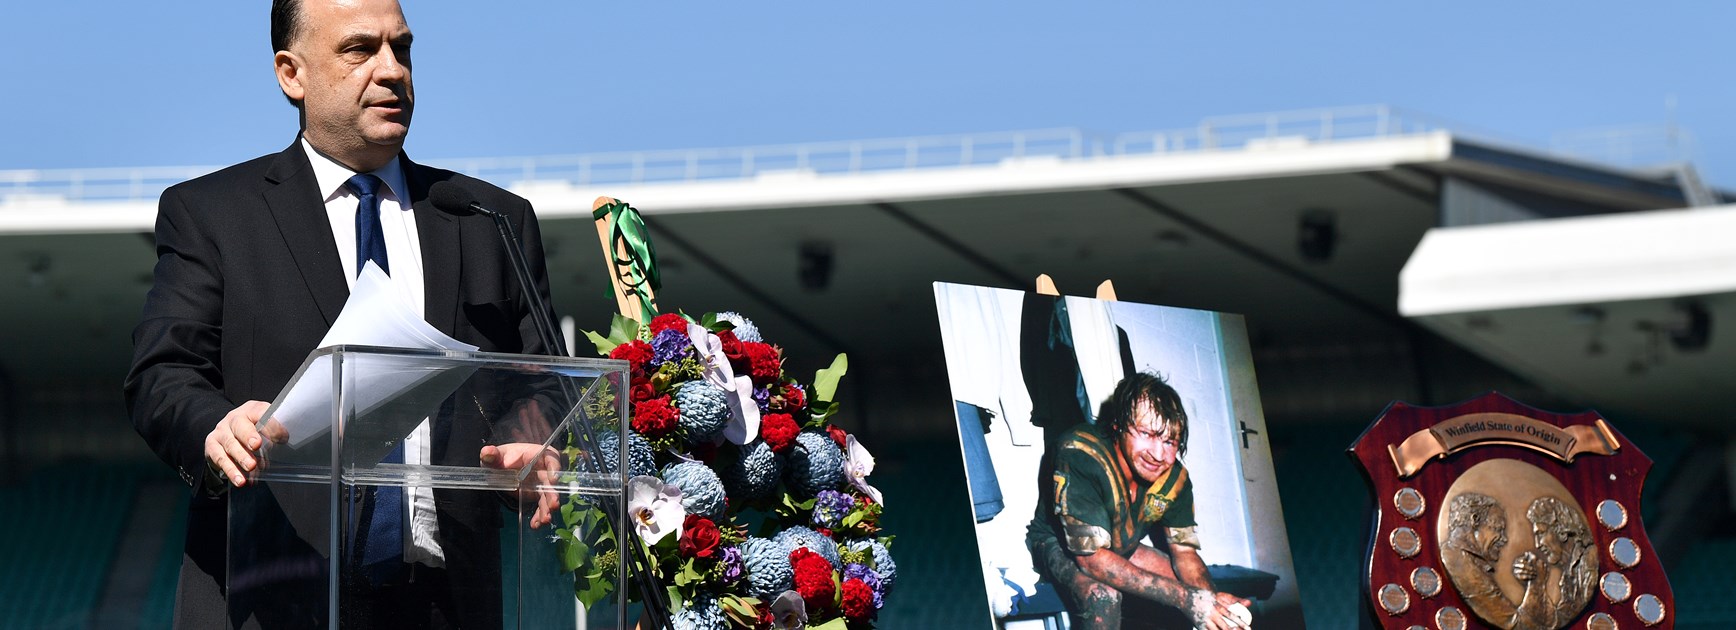 ARLC chairman Peter V'landys delivers an eulogy at the memorial service for Tom Raudonikis at the SCG.